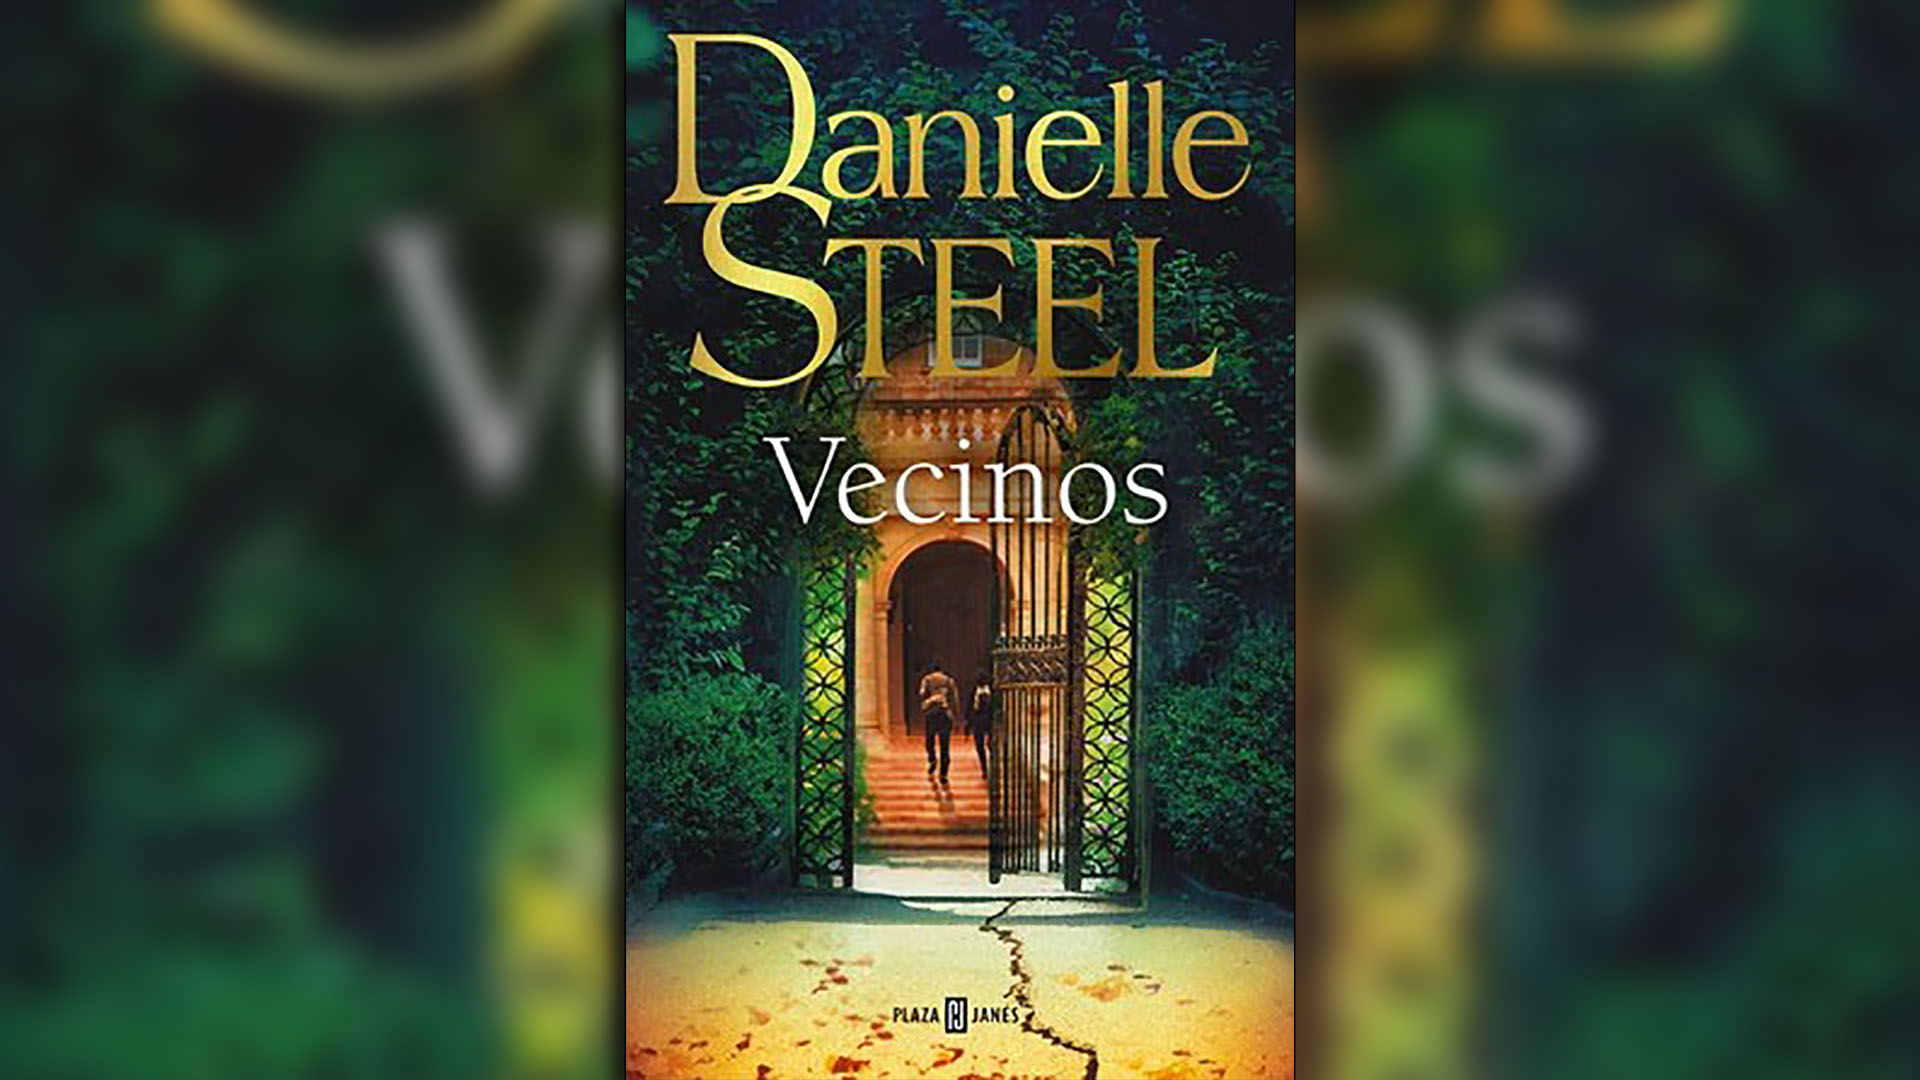 “Neighbors” by the most widely read romantic author, Danielle Steel.